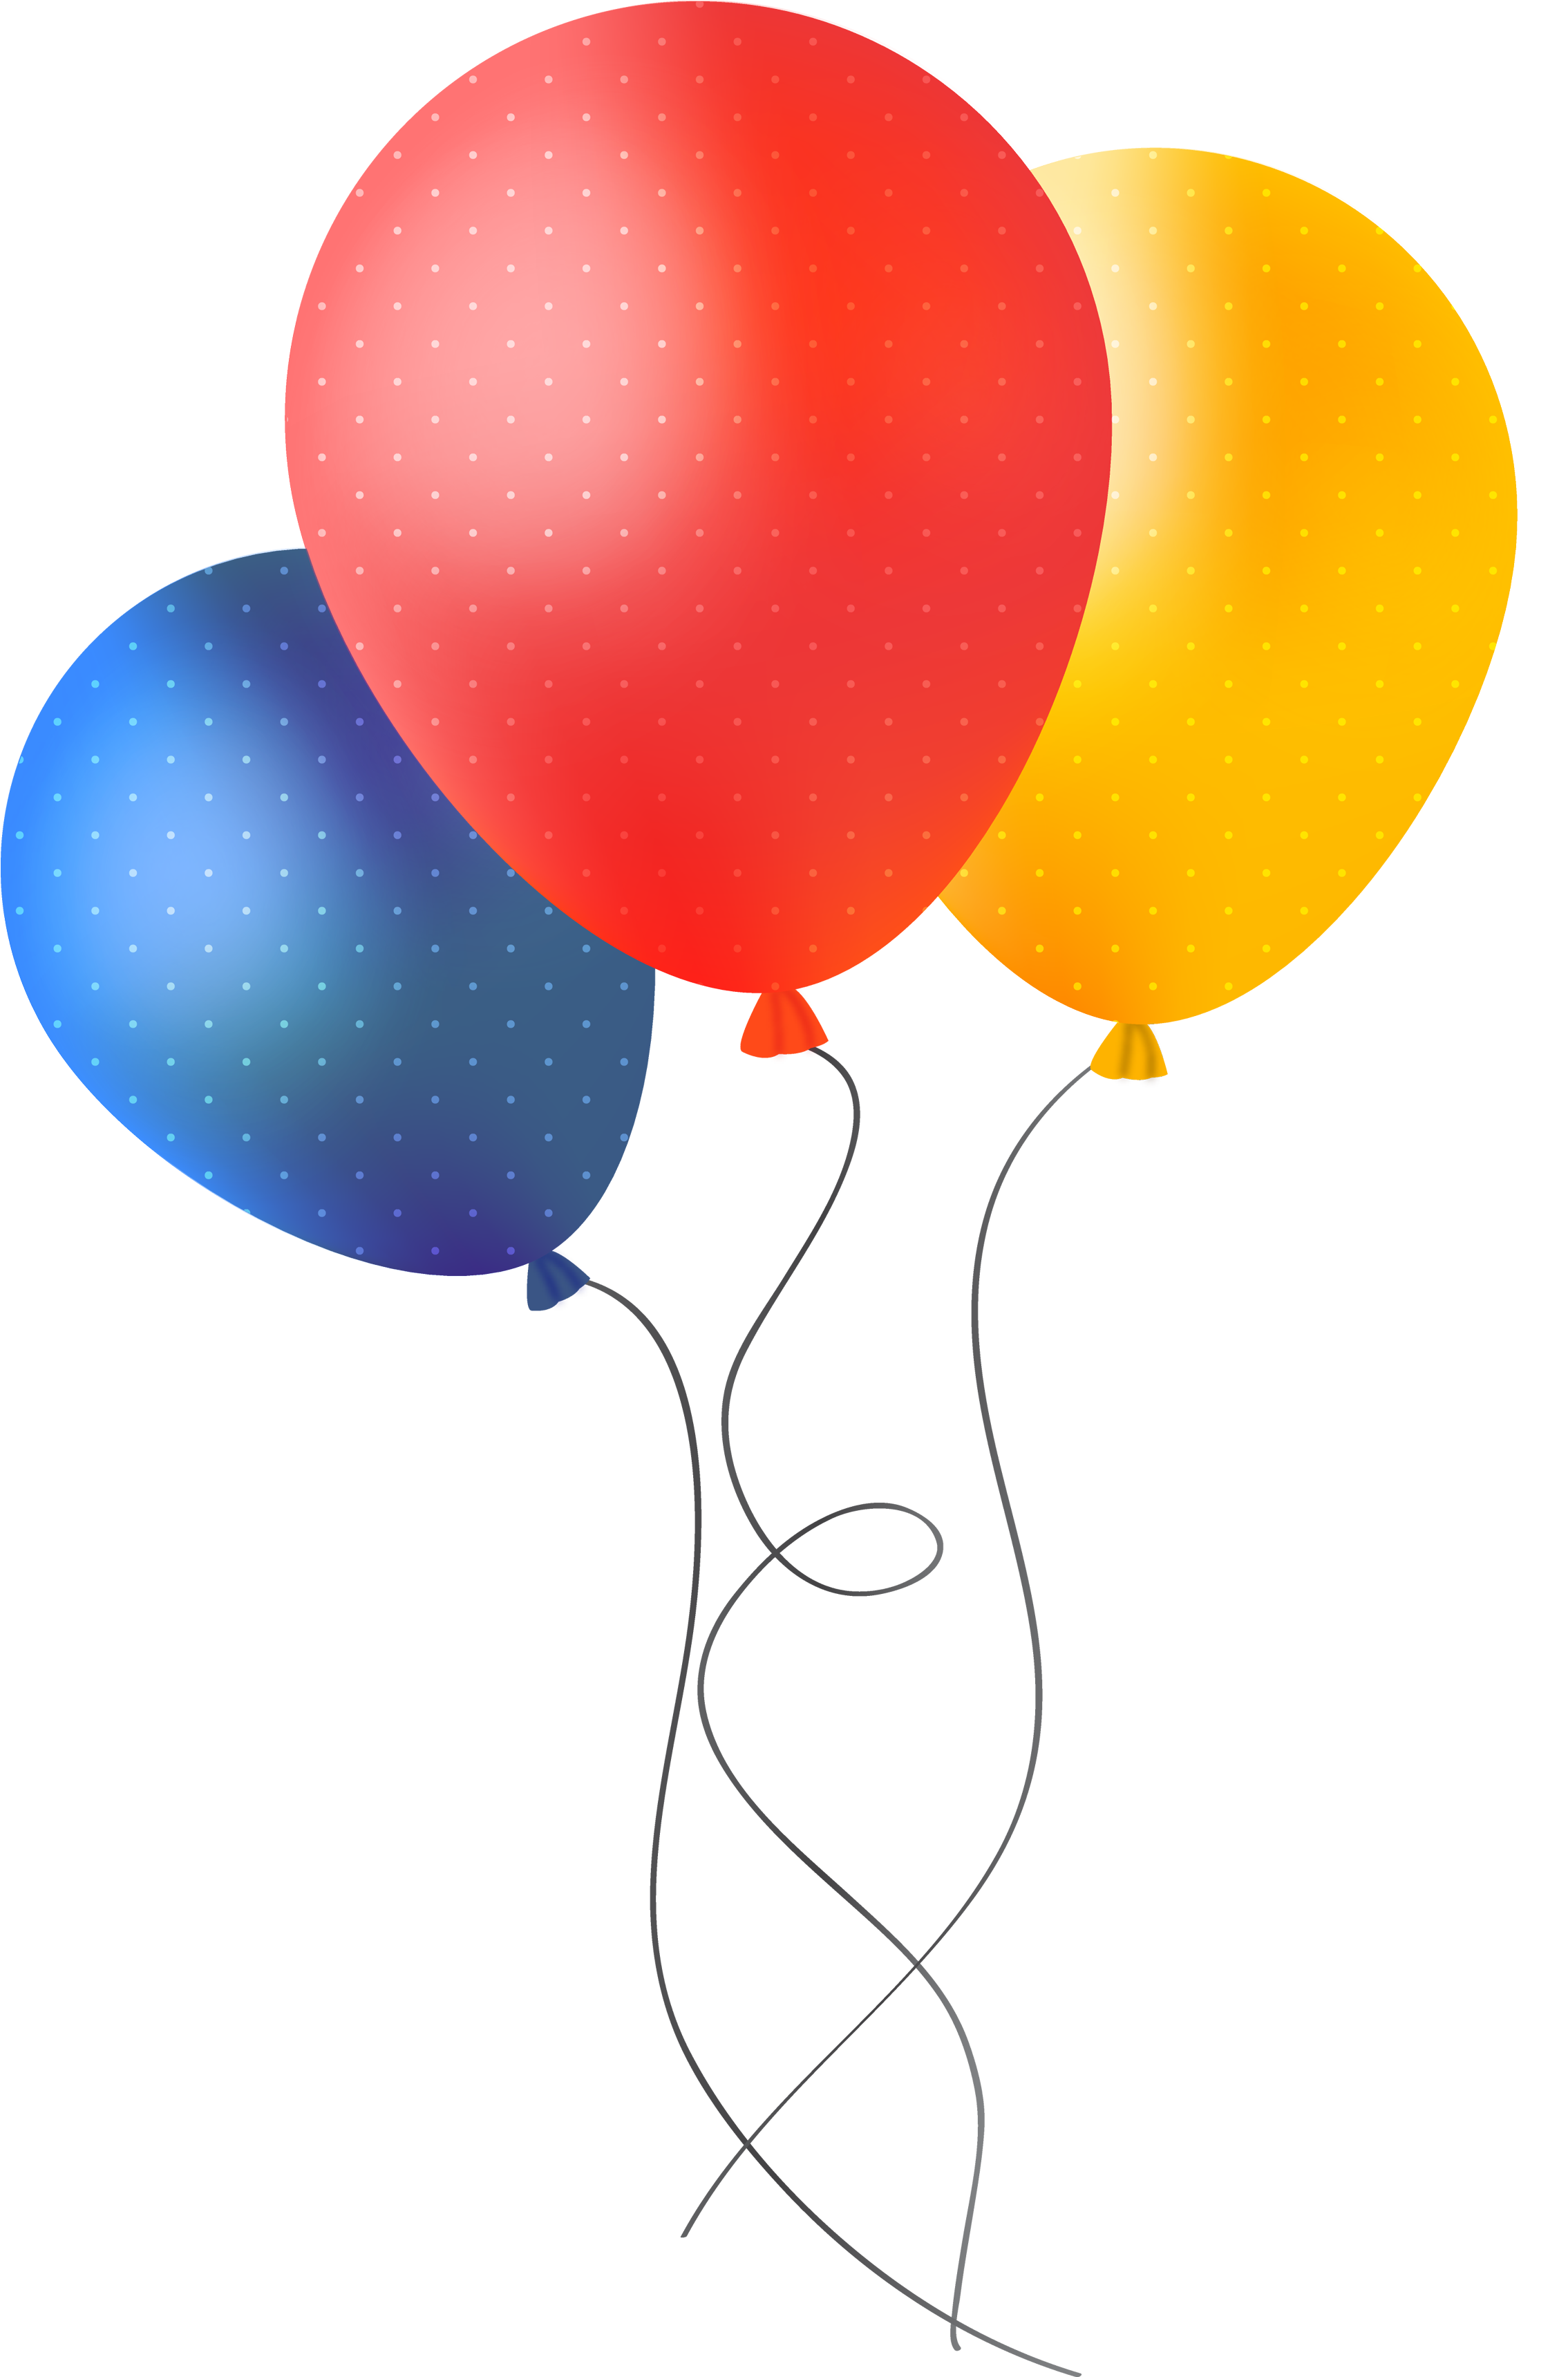 Balloons Numbers Clip Art Free Transparent Clipart Clipartkey Images